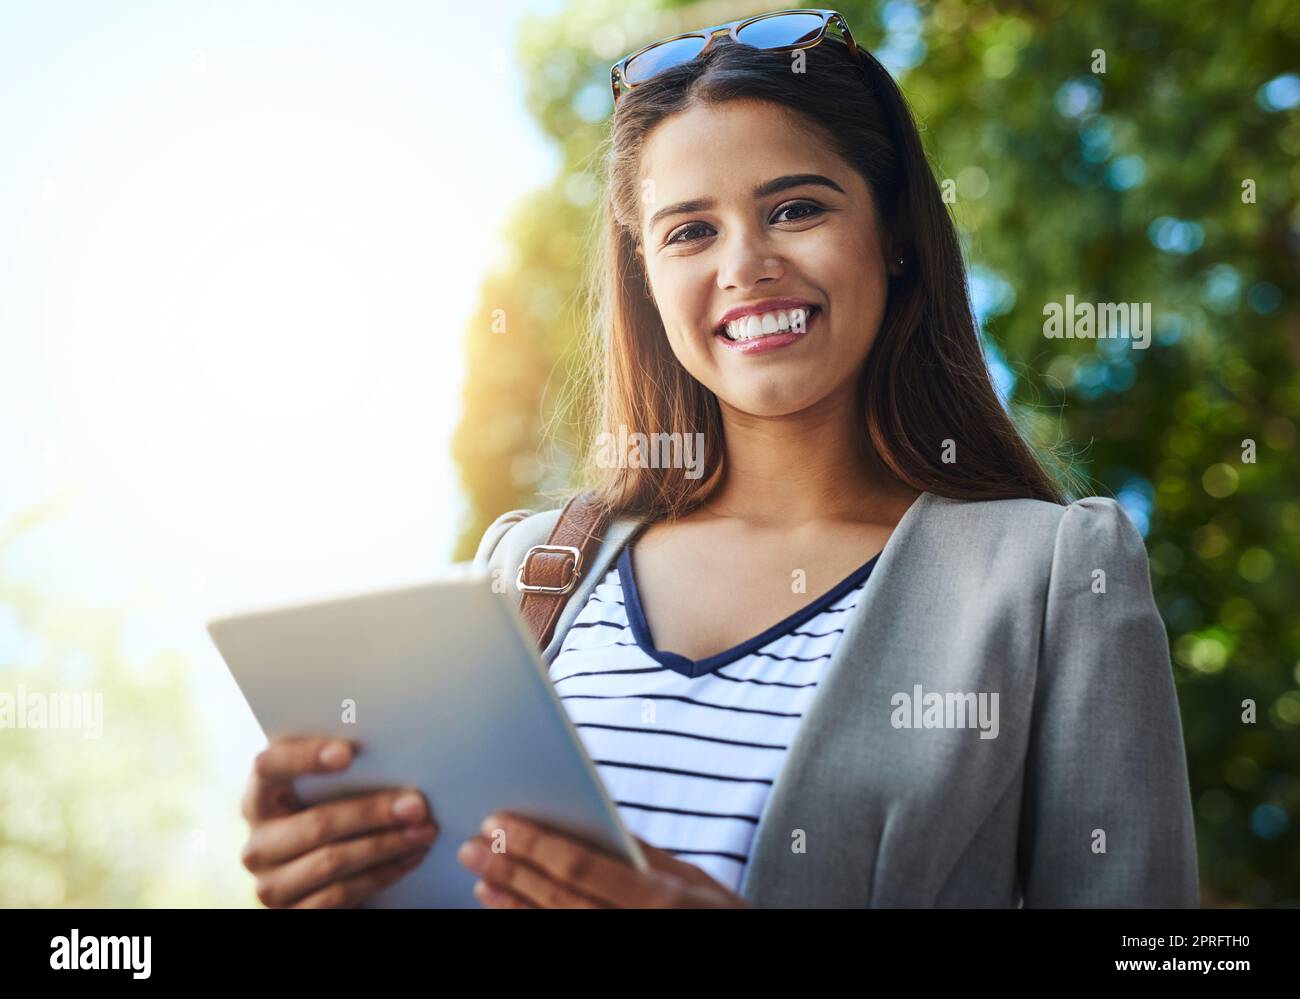 Business never stops, and neither do I. Cropped portrait of an attractive young woman using her tablet while commuting to work. Stock Photo